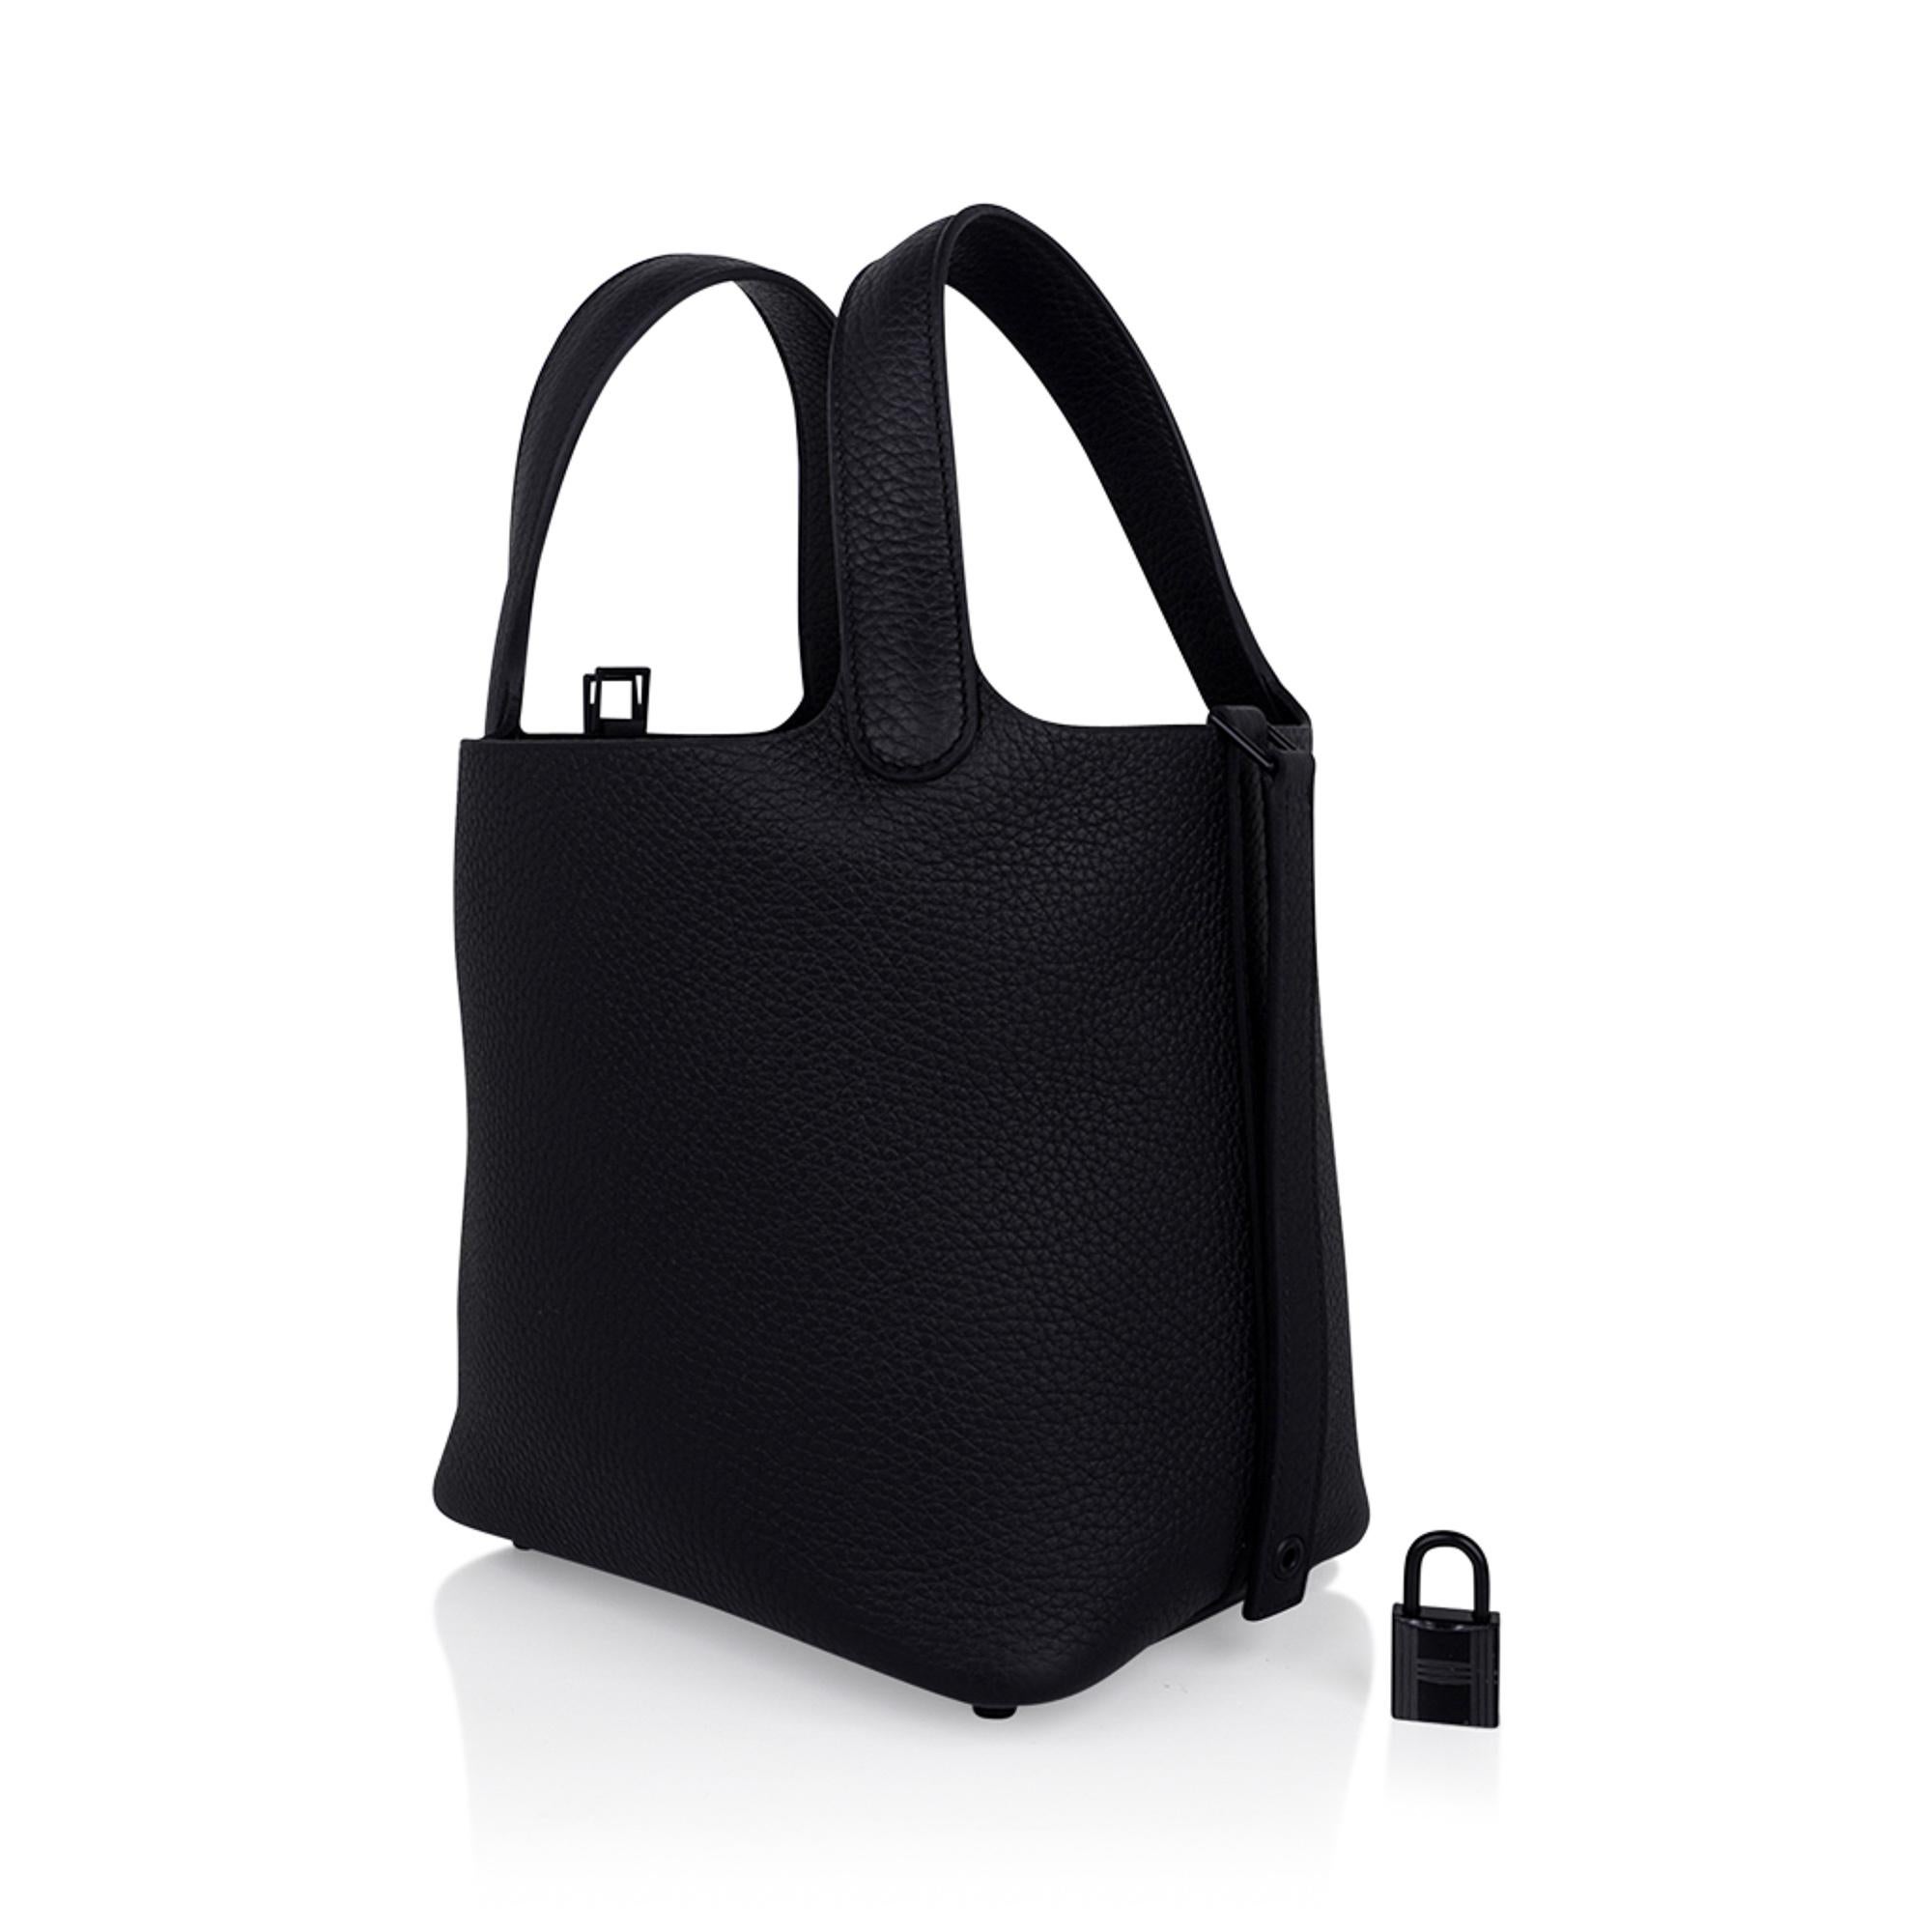 Mightychic offers a Limited Edition So Black Hermes Picotin Lock 18 tote bag.
Fabulous, perfect to go bag! 
Black Clemence leather with Black hardware.
This roomy small tote is a perfect go to bag!
Comes with lock and keys, sleeper, and signature